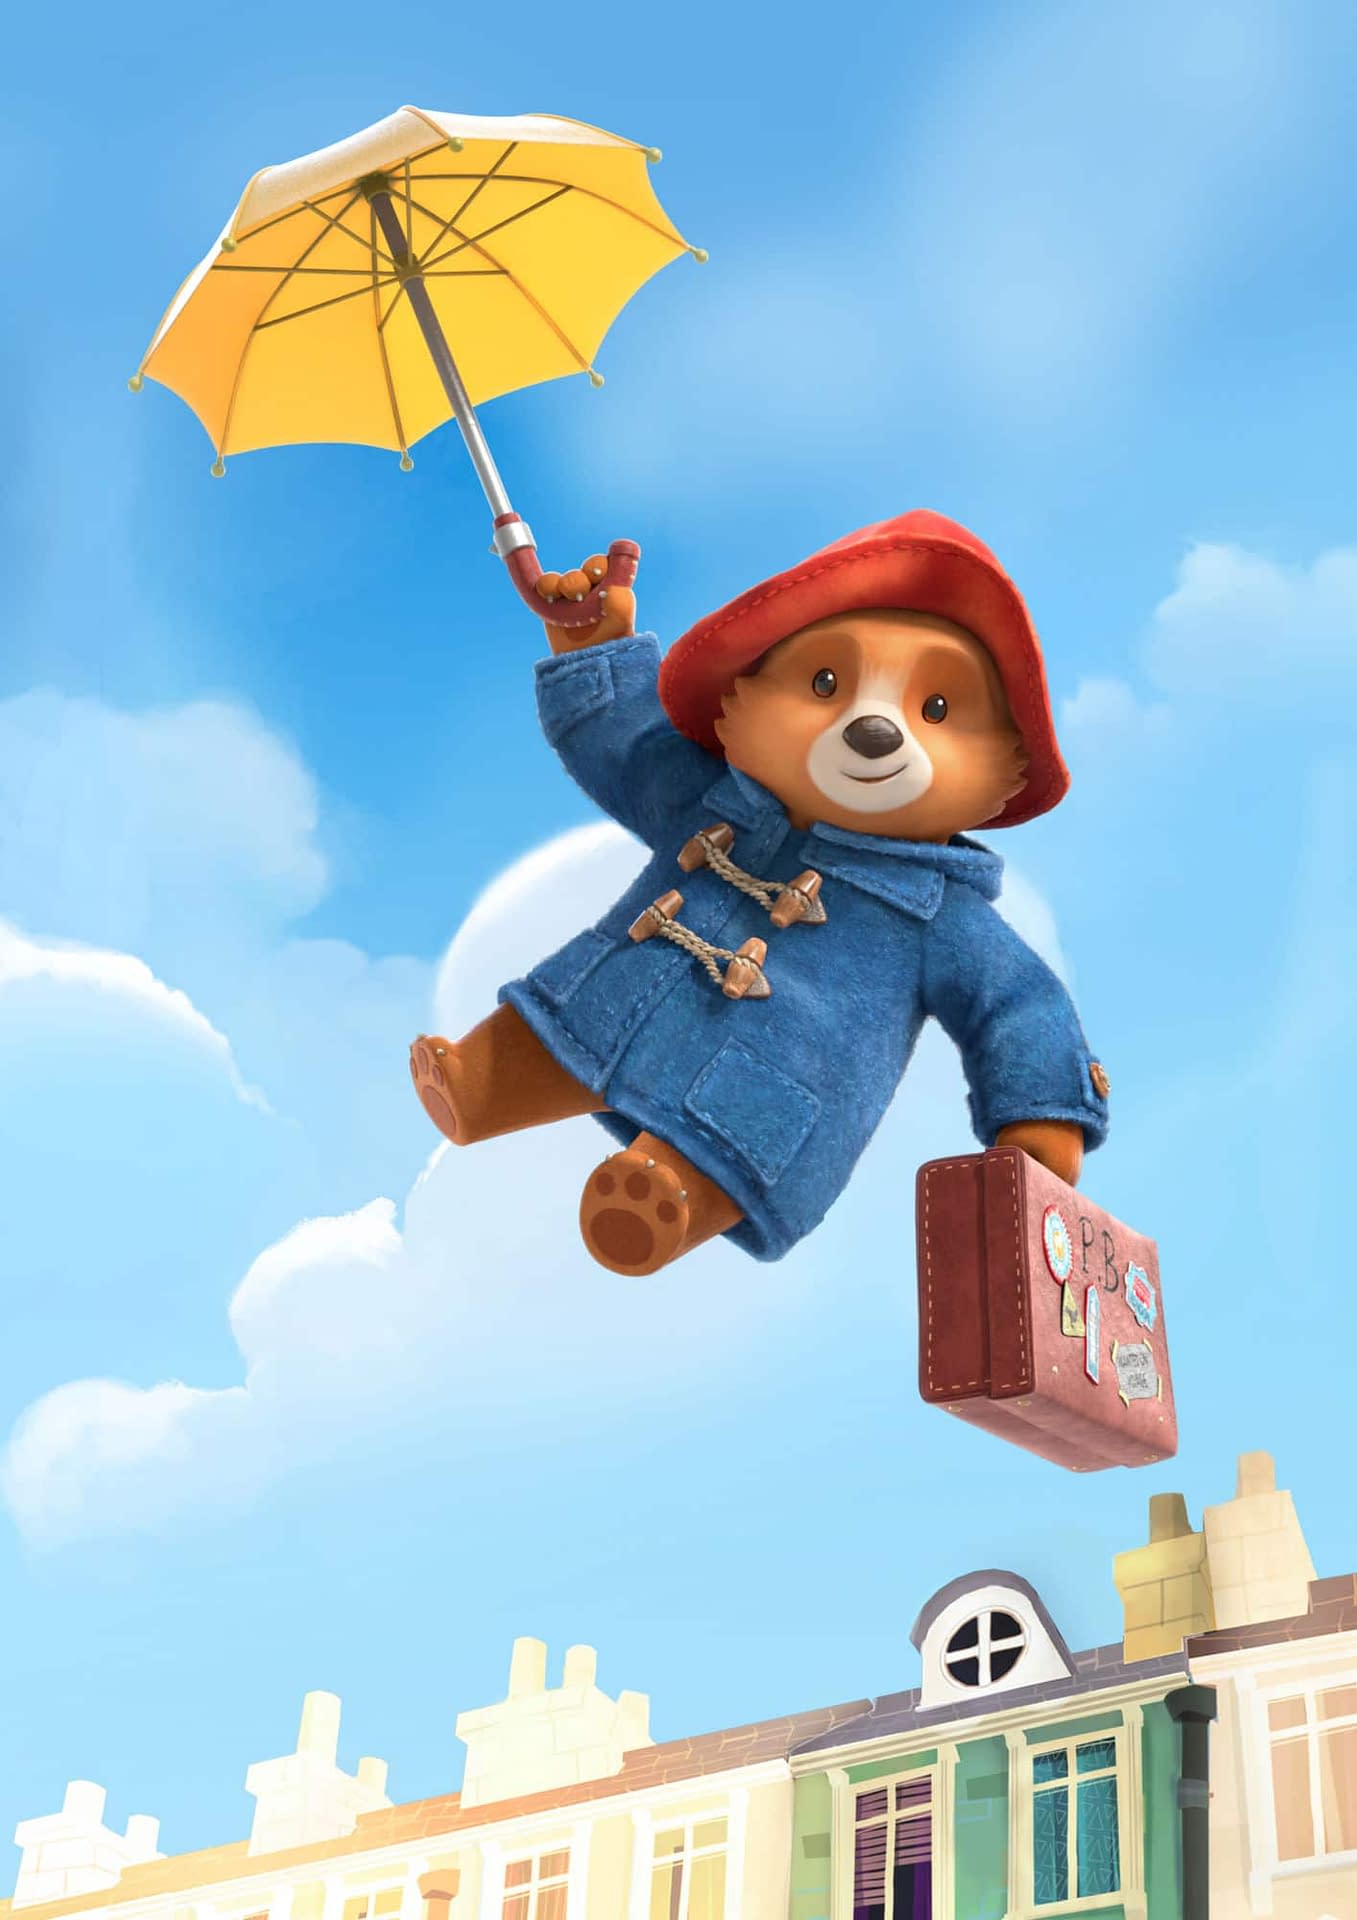 A Paddington Animated TV Show is in the Works, Paddington 3 is in Development